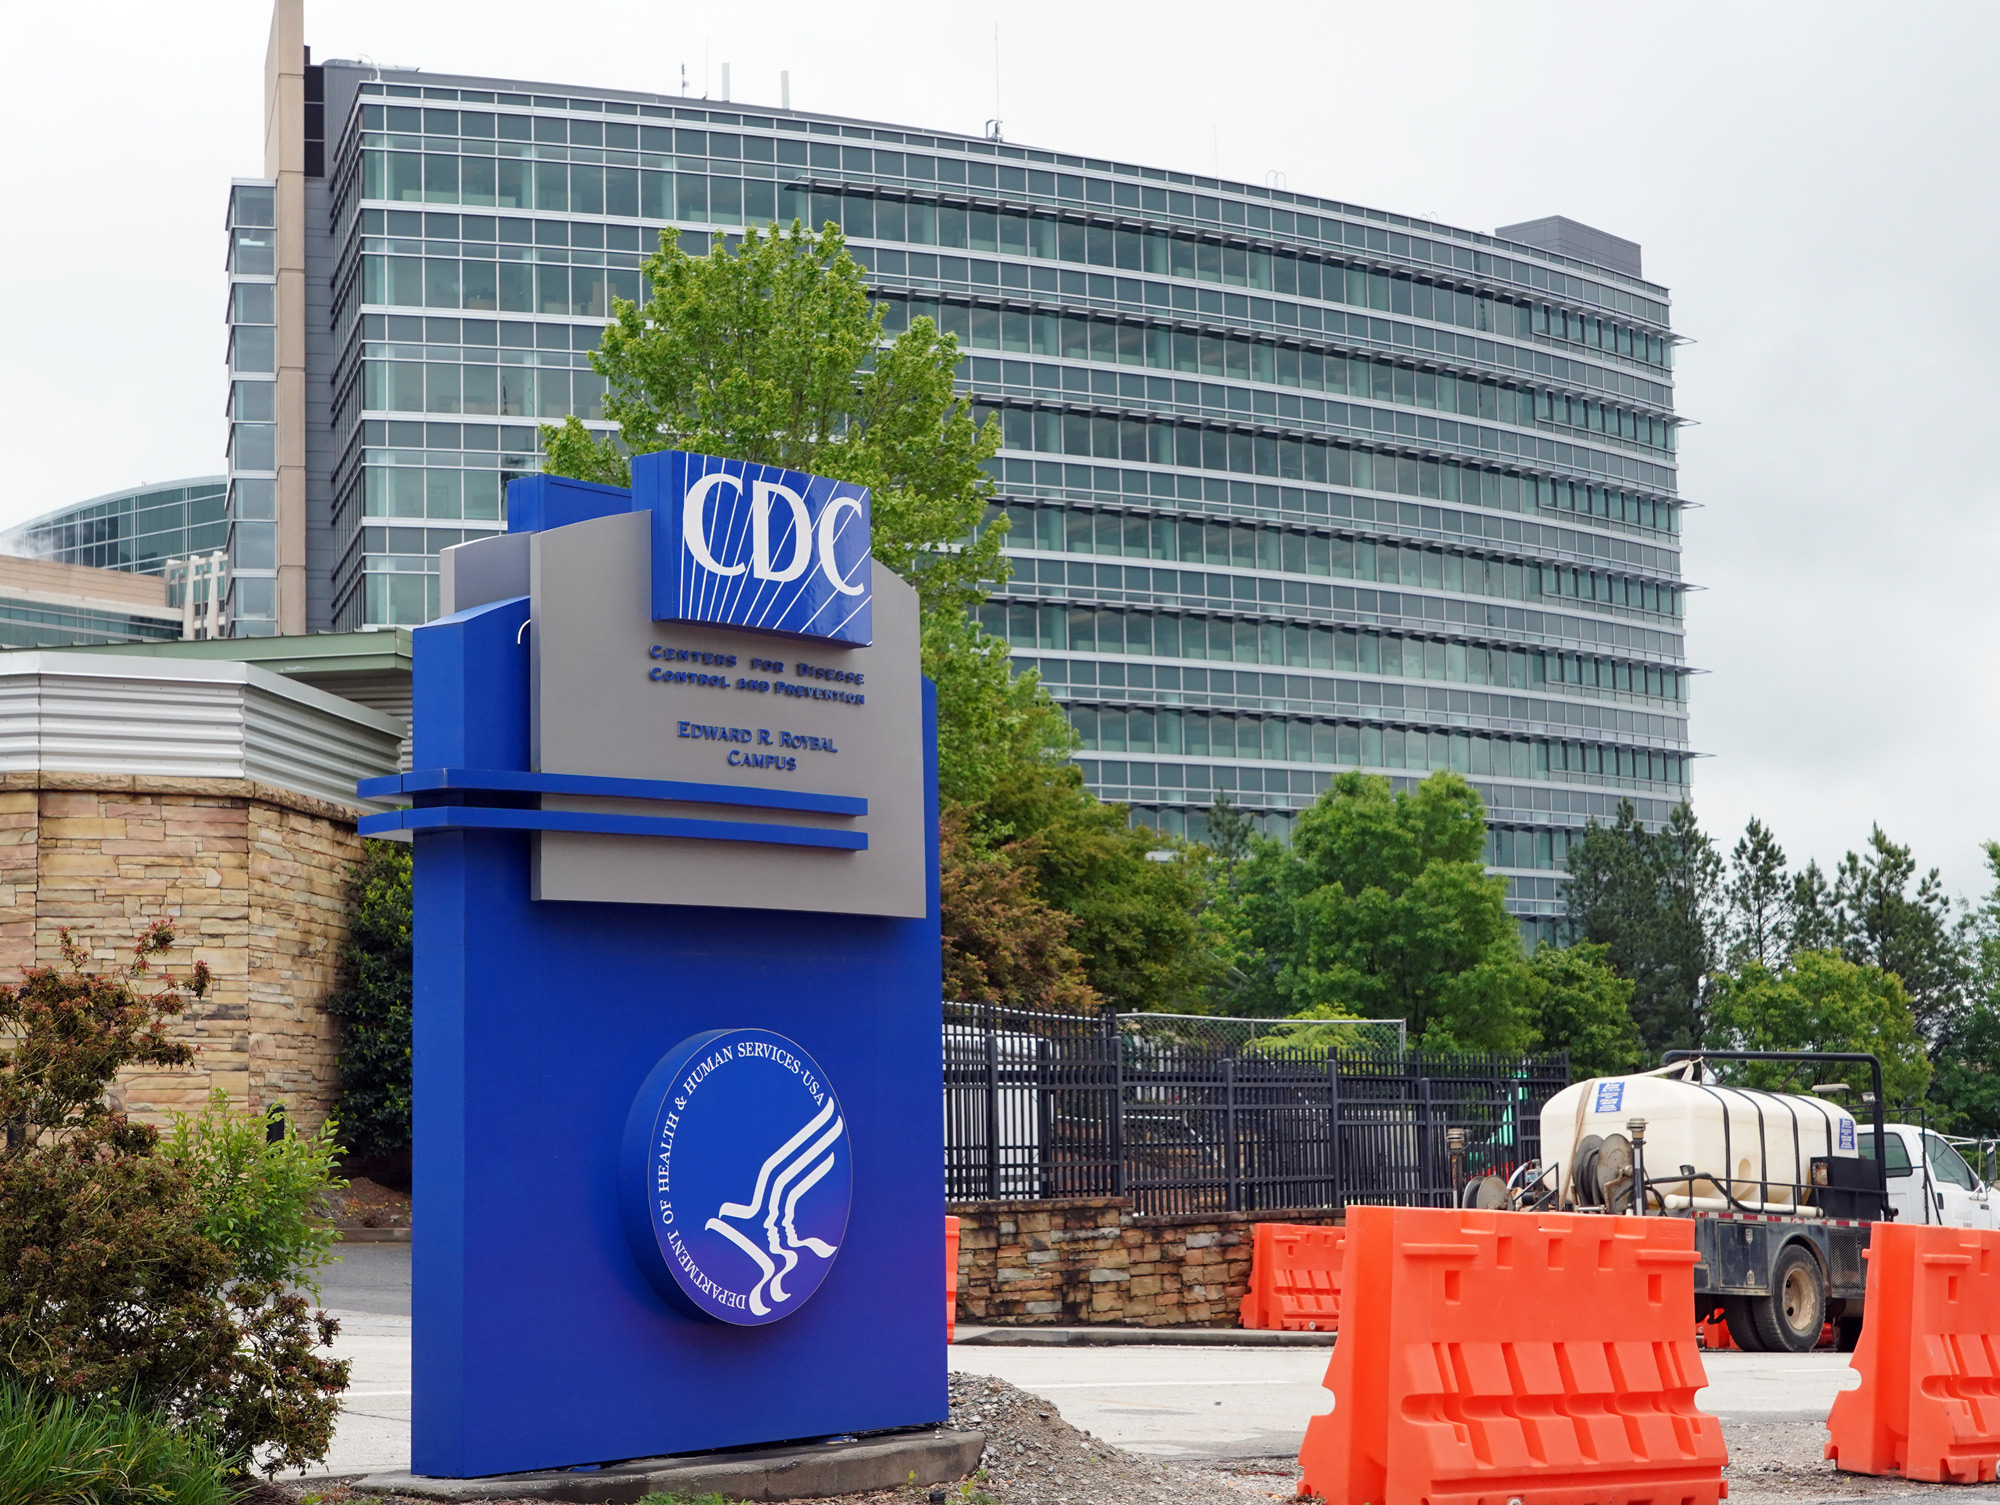 The Centers for Disease Control and Prevention Edward R. Roybal campus is seen in Atlanta on April 23.